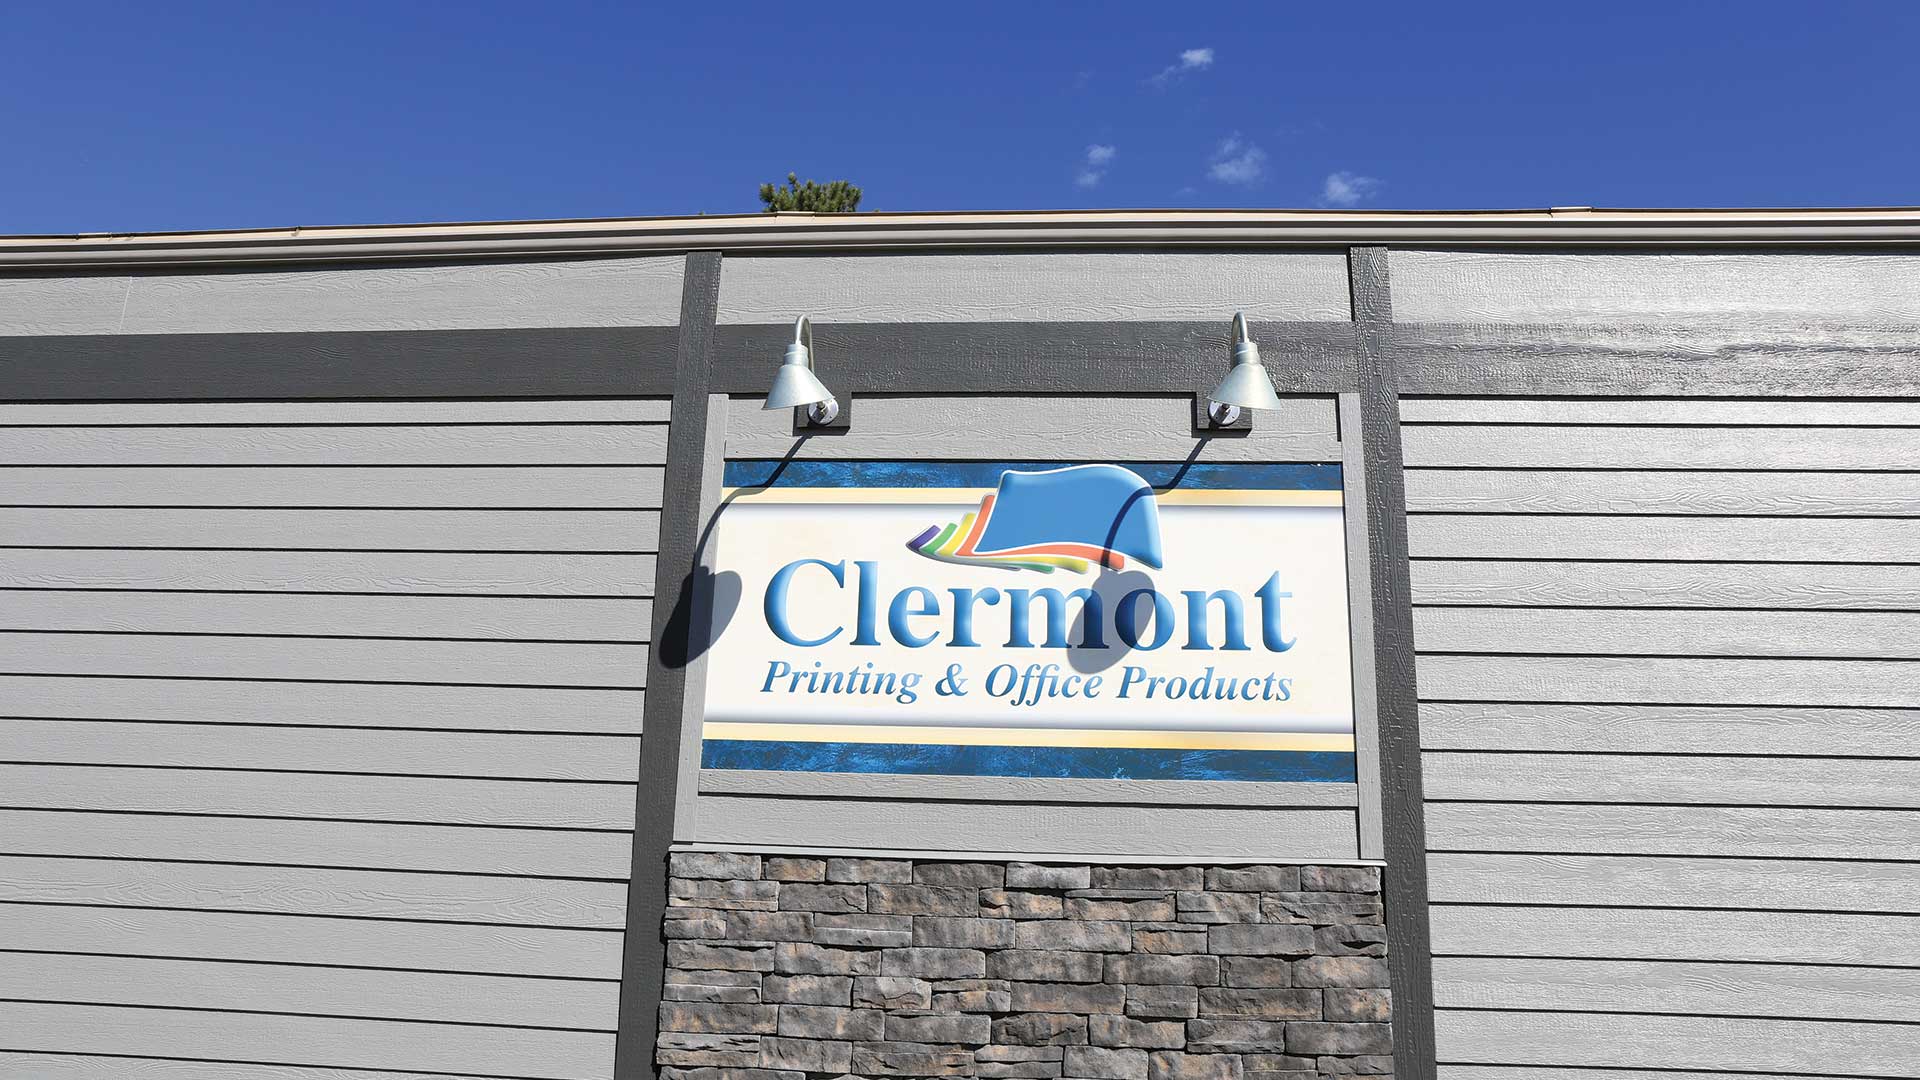 Clermont Printing & Office Products exterior